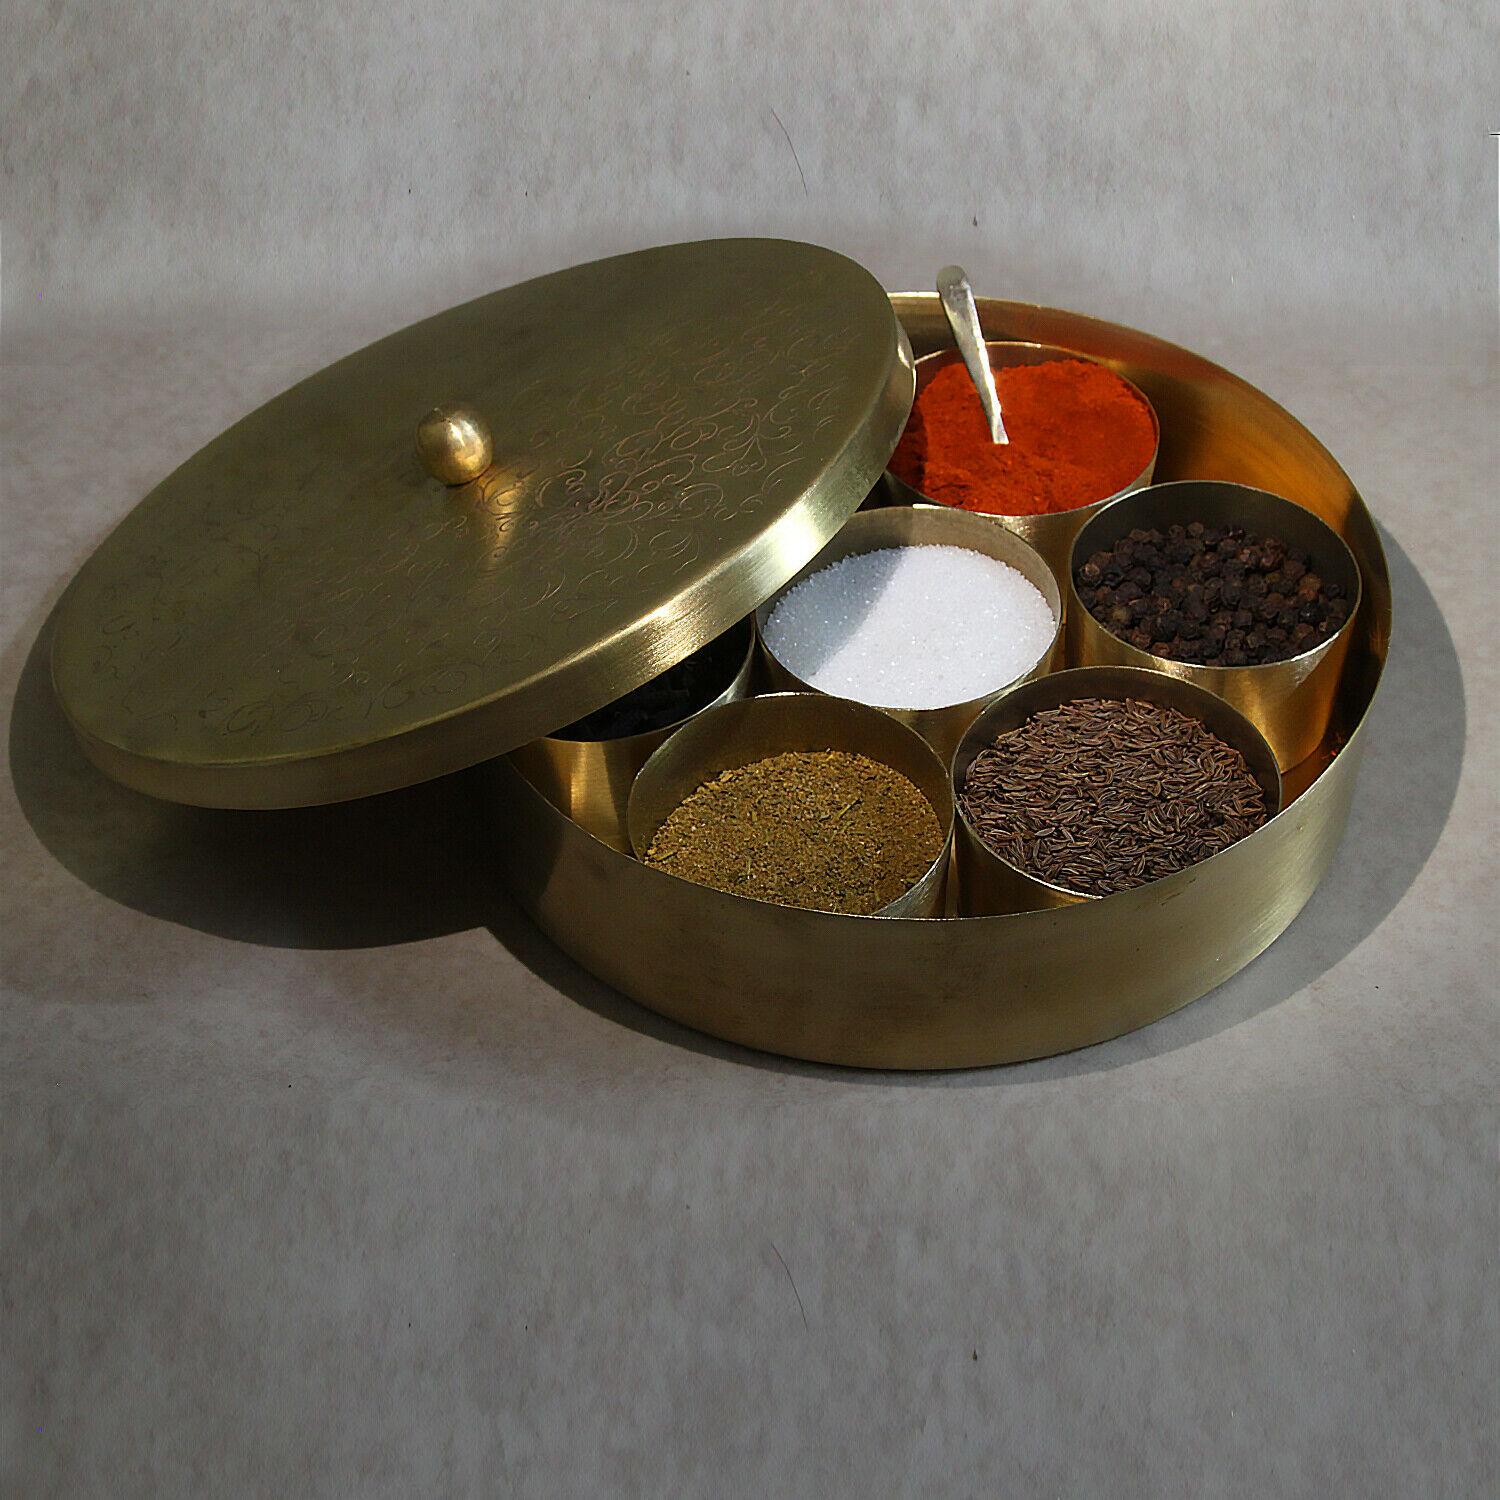 Authentic Indian Spice Box with Double Lid 24cm 7 Spice Packs & Indian Spice Guide 7 Spice Spoons Large 